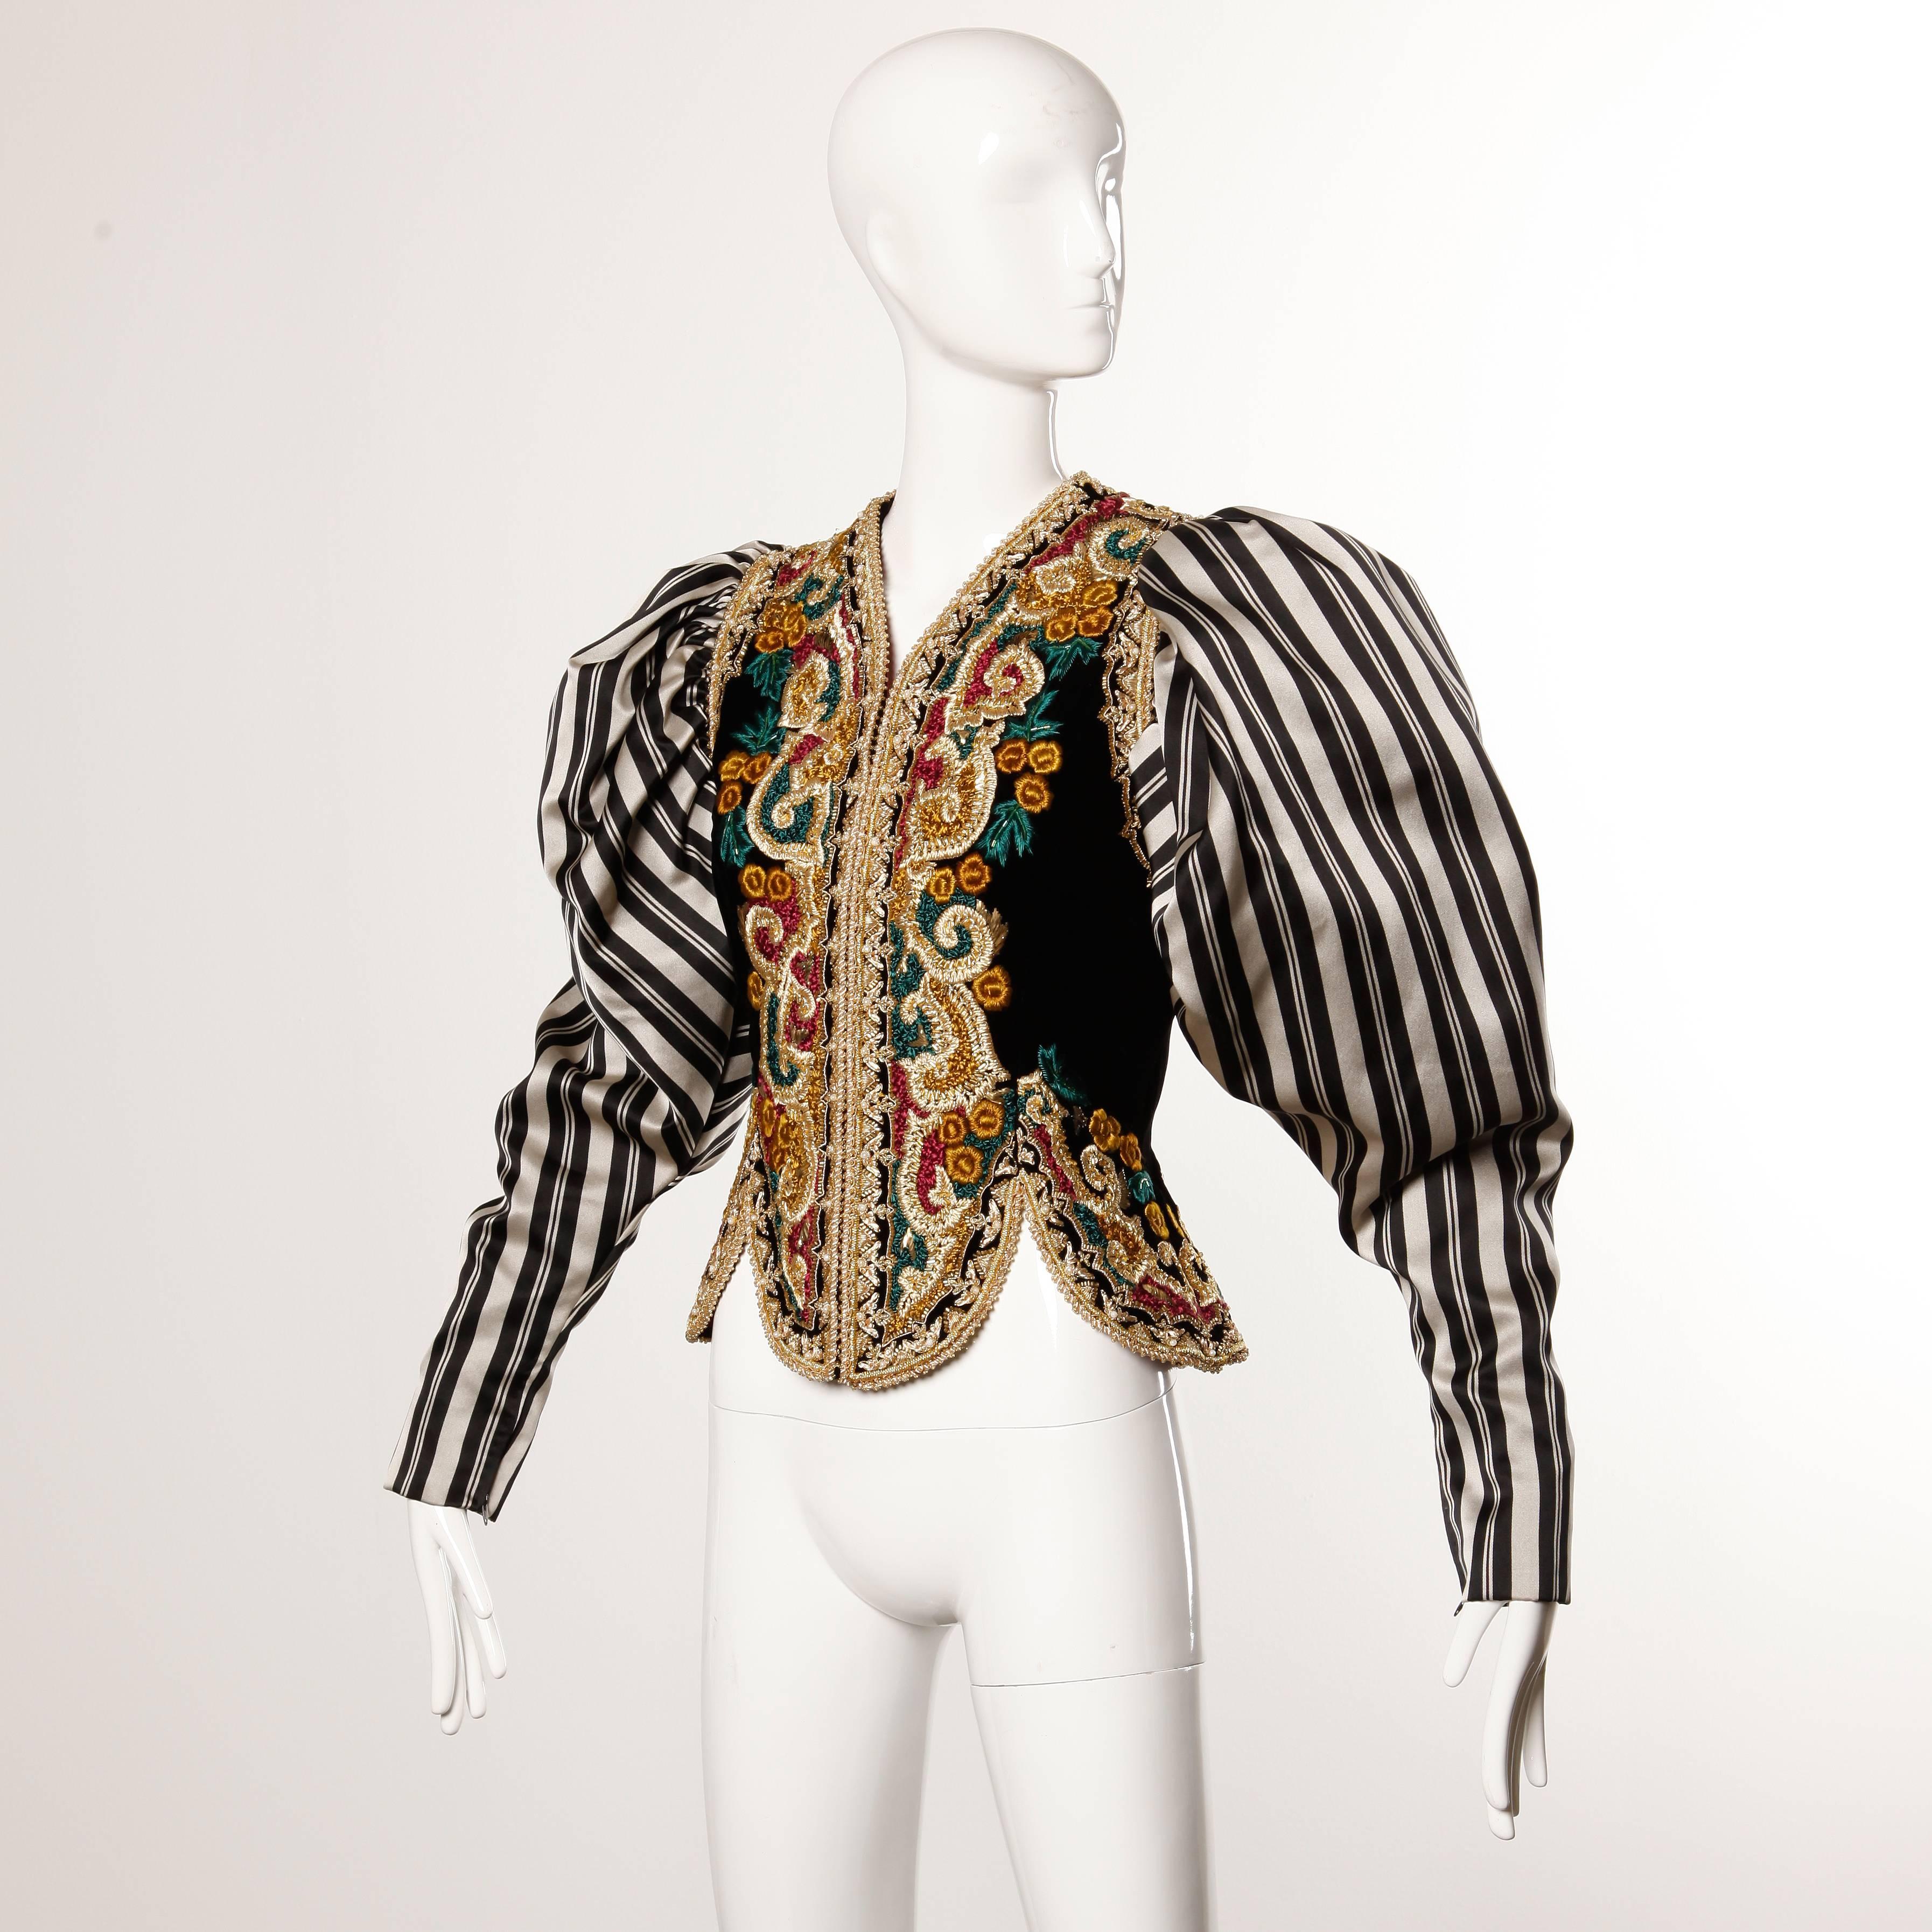 Incredible vintage 1980s embroidered jacket with massive striped silk satin sleeves by Oscar de la Renta. Meticulous hand embroidered Baroque-inspired design with tiny pearl beads. The jacket zips up the front and is fully lined in heavy silk satin.